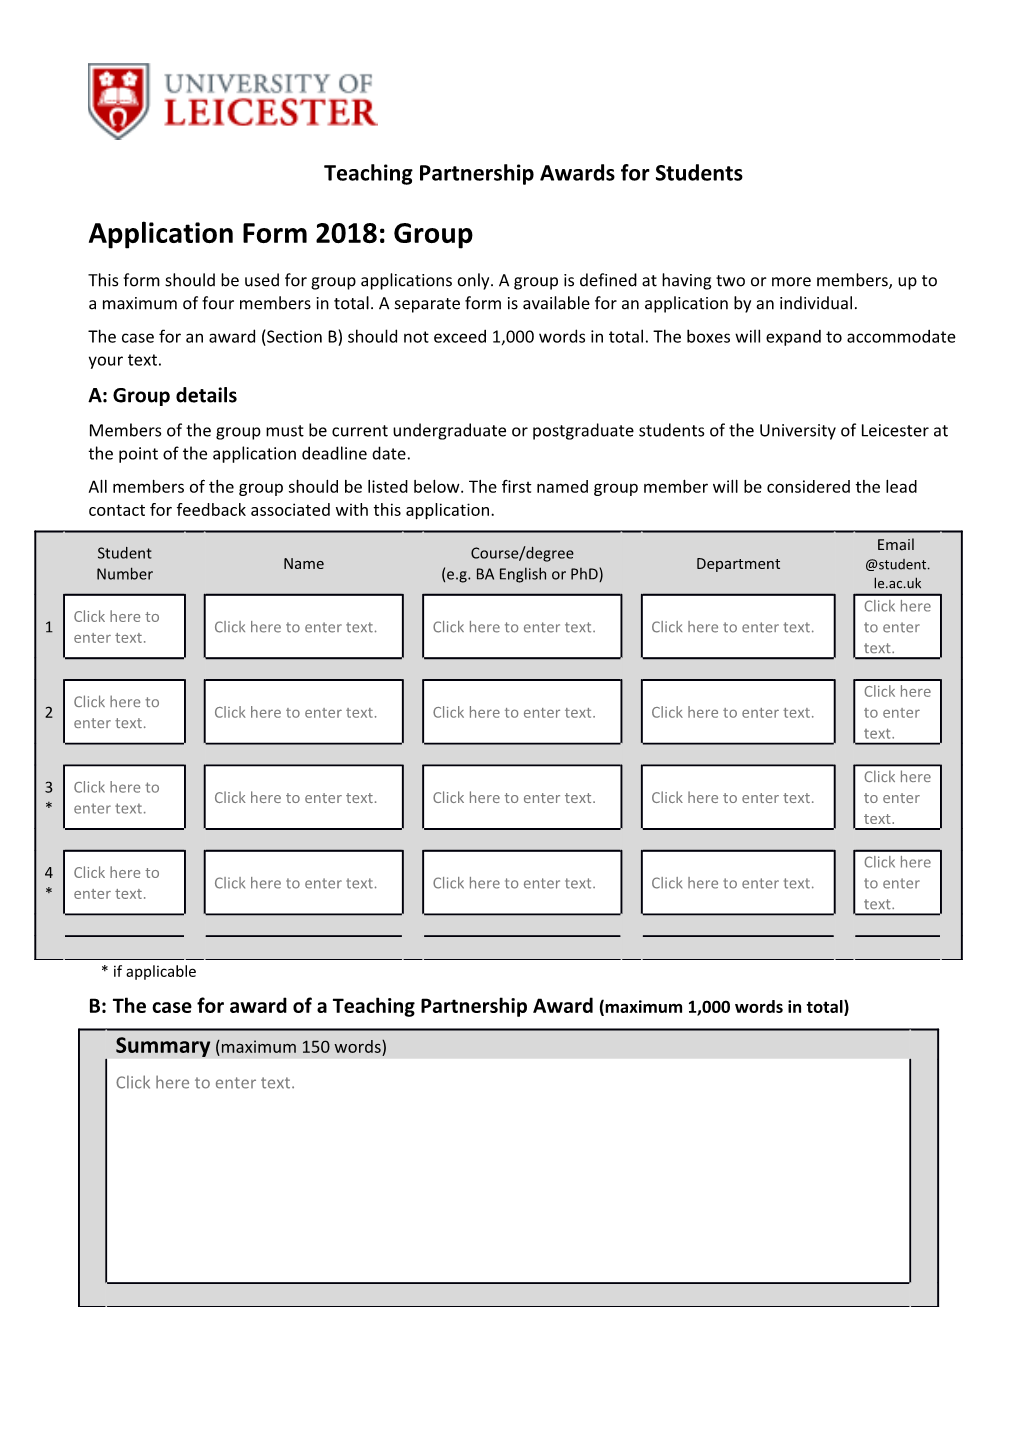 Application Form 2018: Group